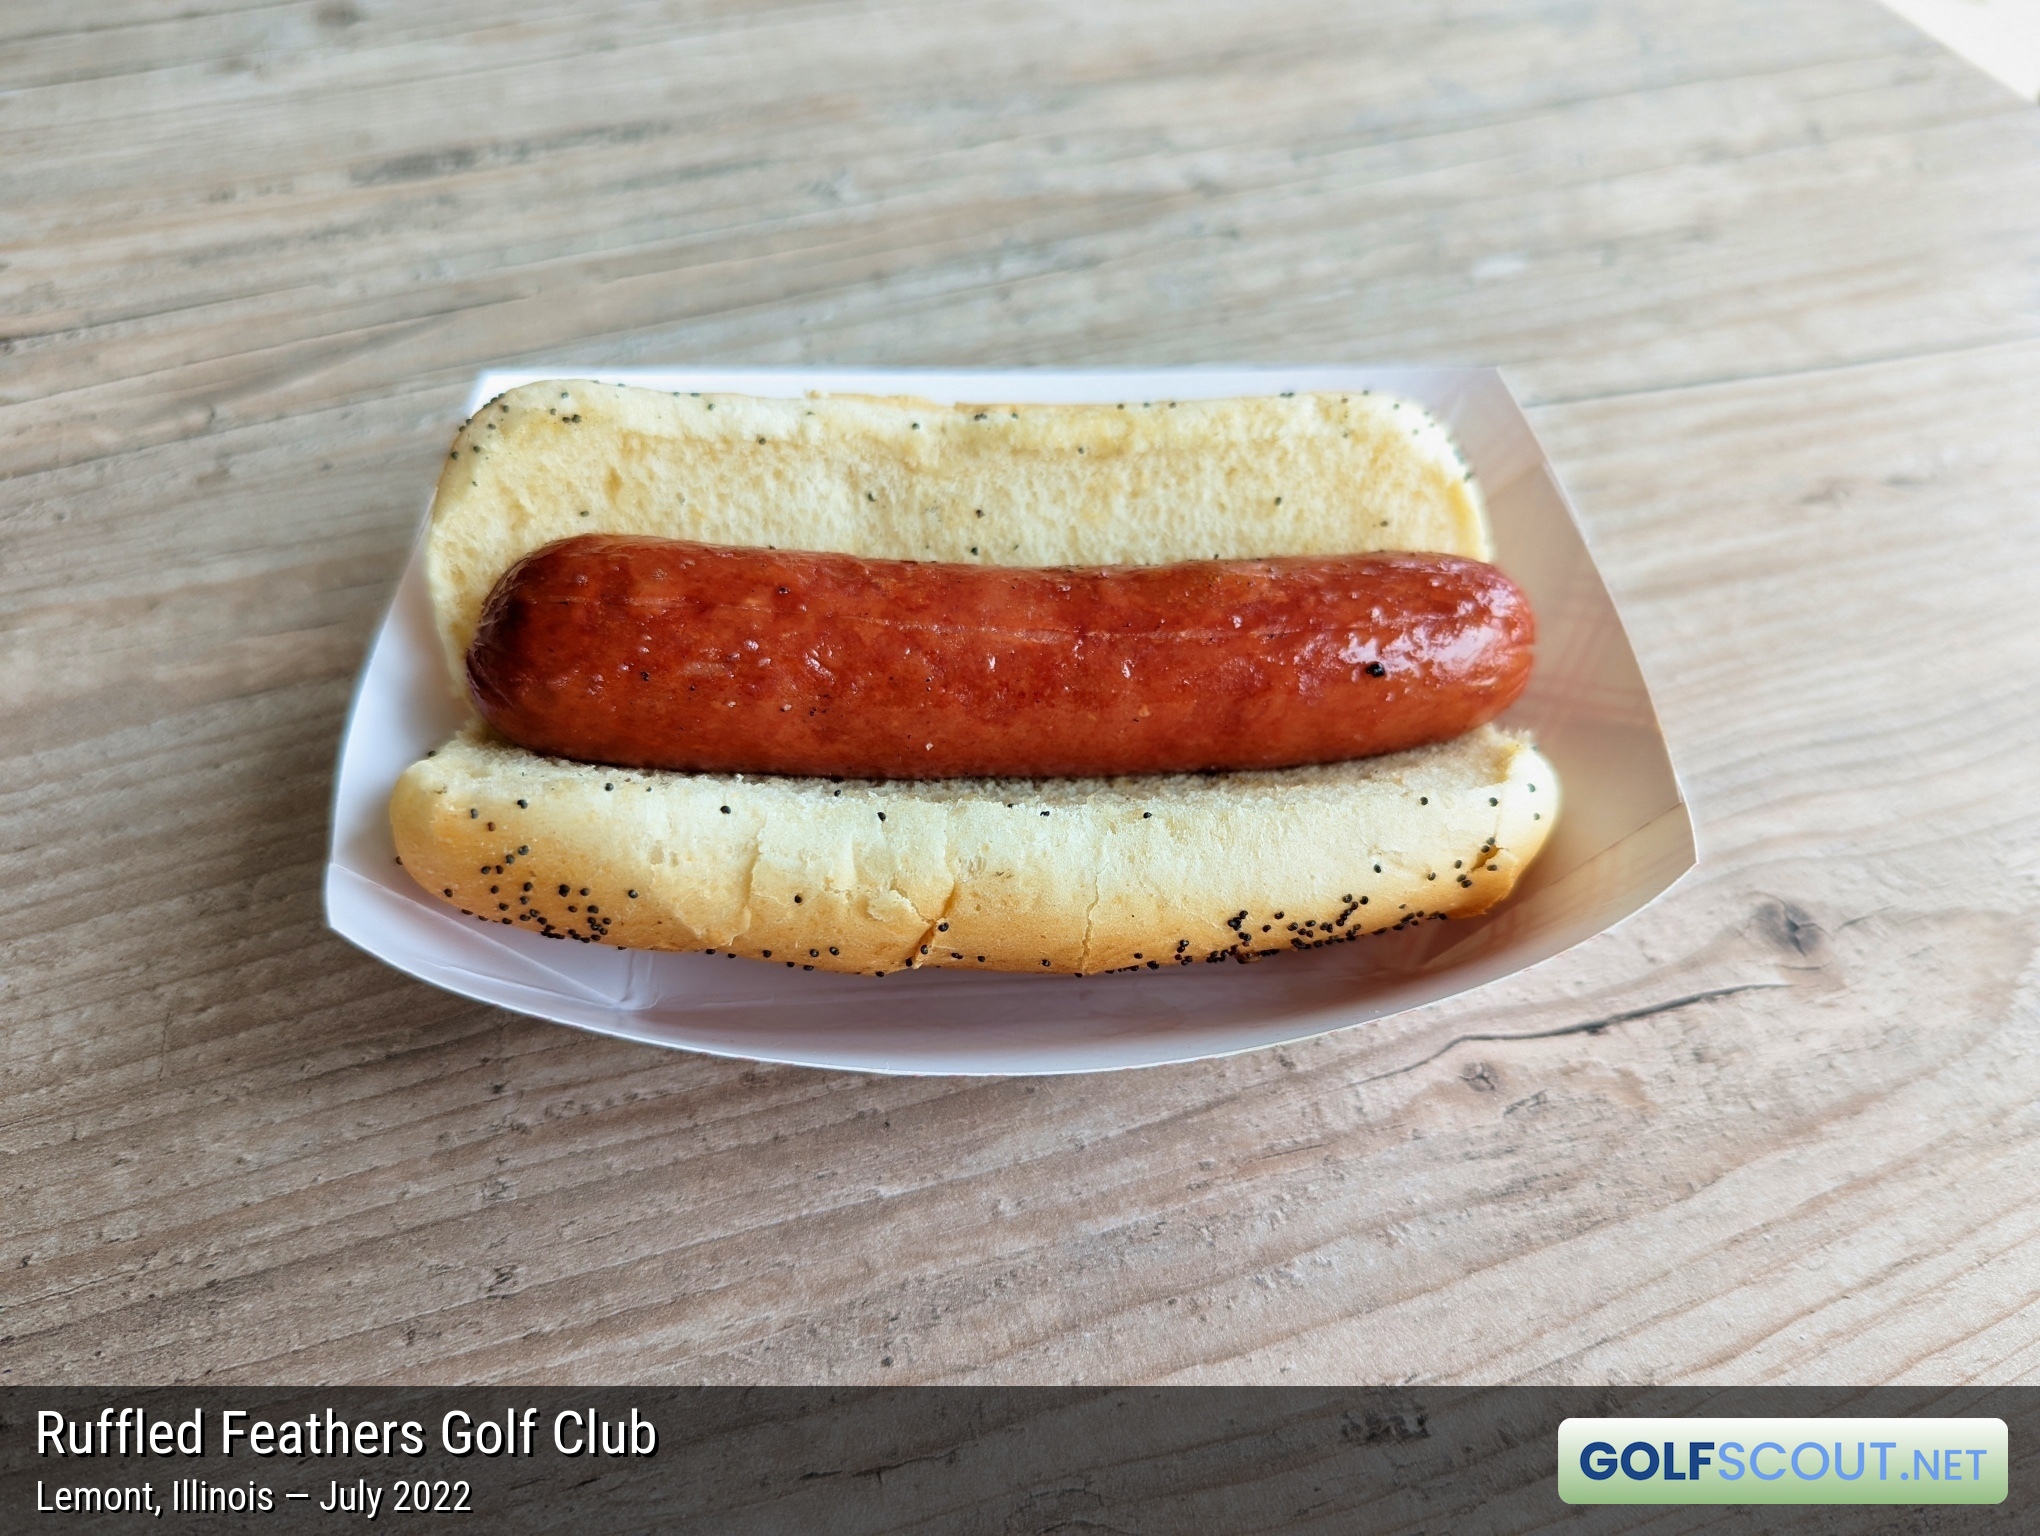 Photo of the food and dining at Ruffled Feathers Golf Club in Lemont, Illinois. Photo of the hot dog at Ruffled Feathers Golf Club in Lemont, Illinois.